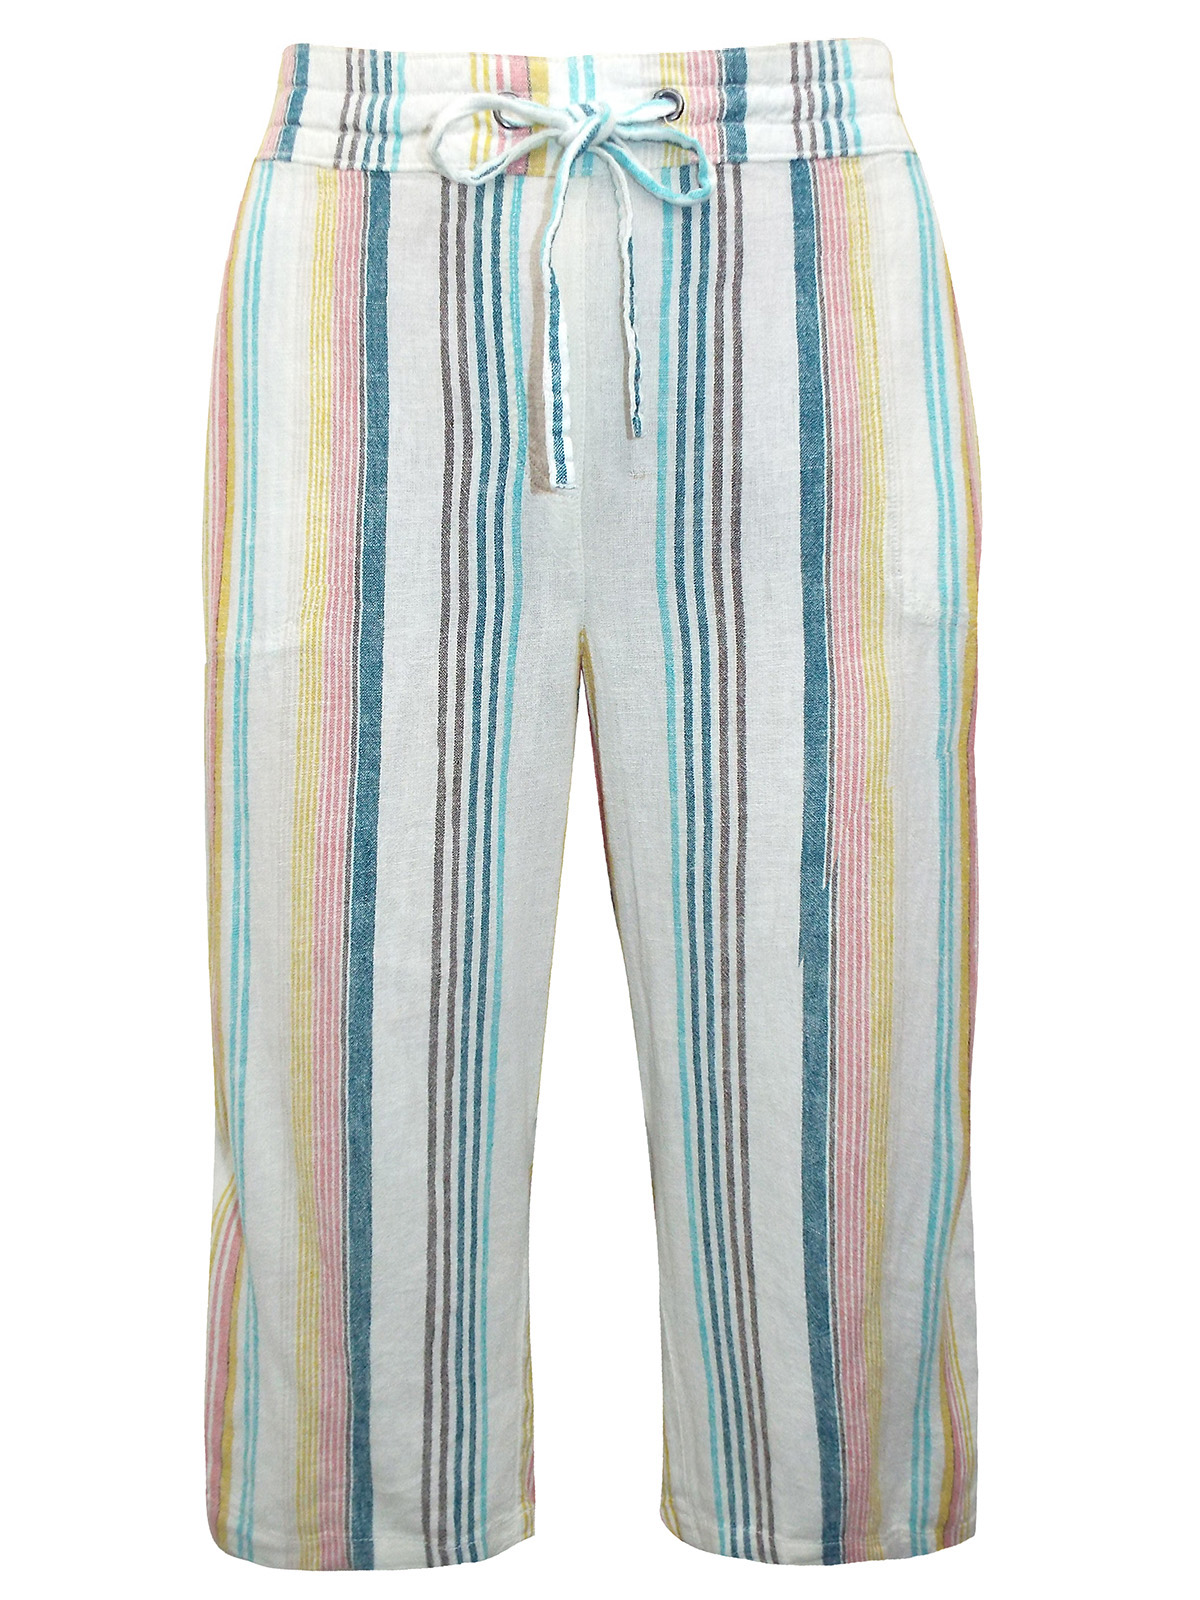 Marks and Spencer - - M&5 MULTI Linen Blend Striped Cropped Trousers ...